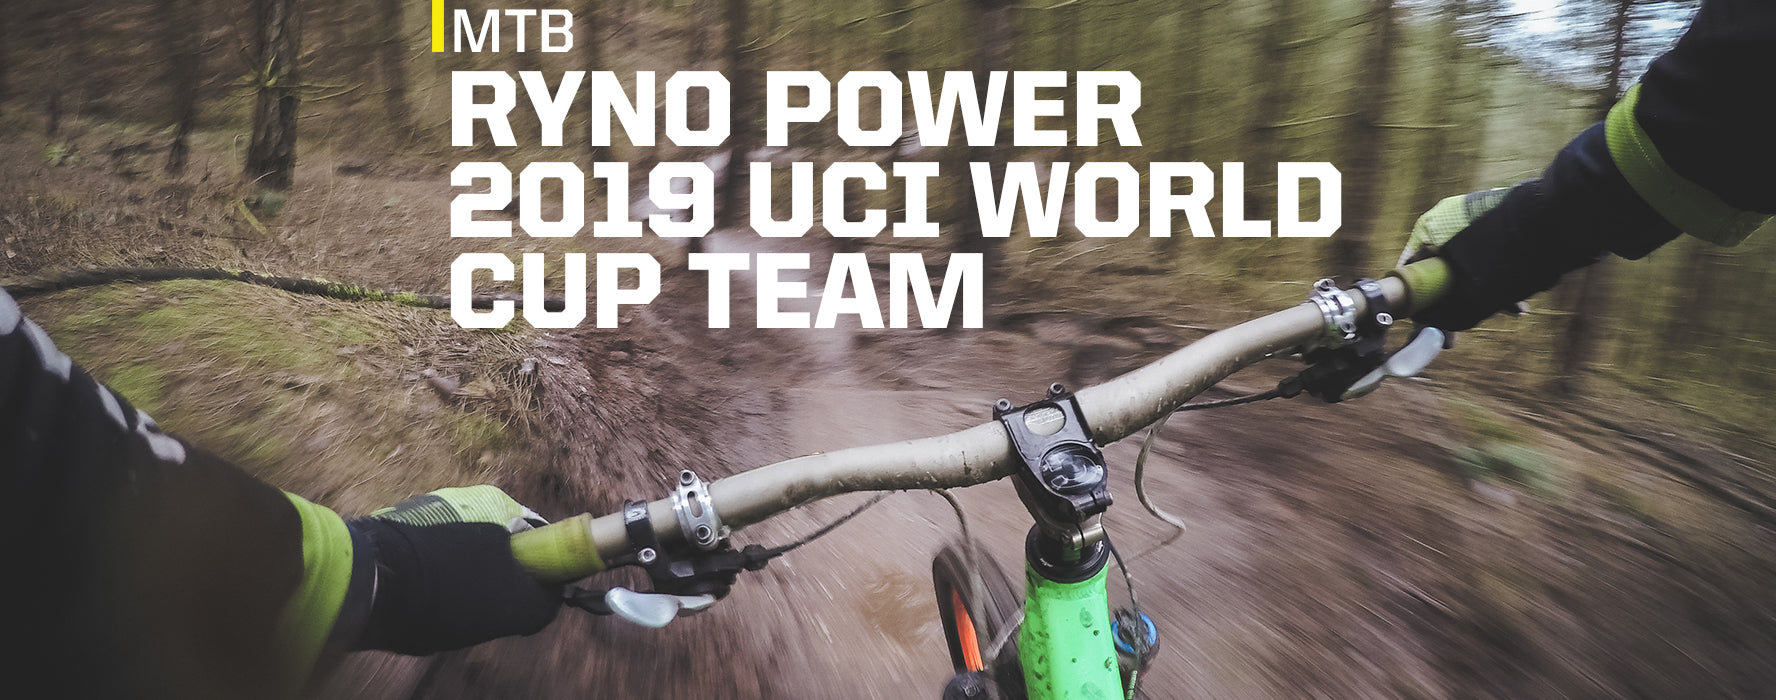 Ryno Power Announces Our 2019 UCI World Cup Team